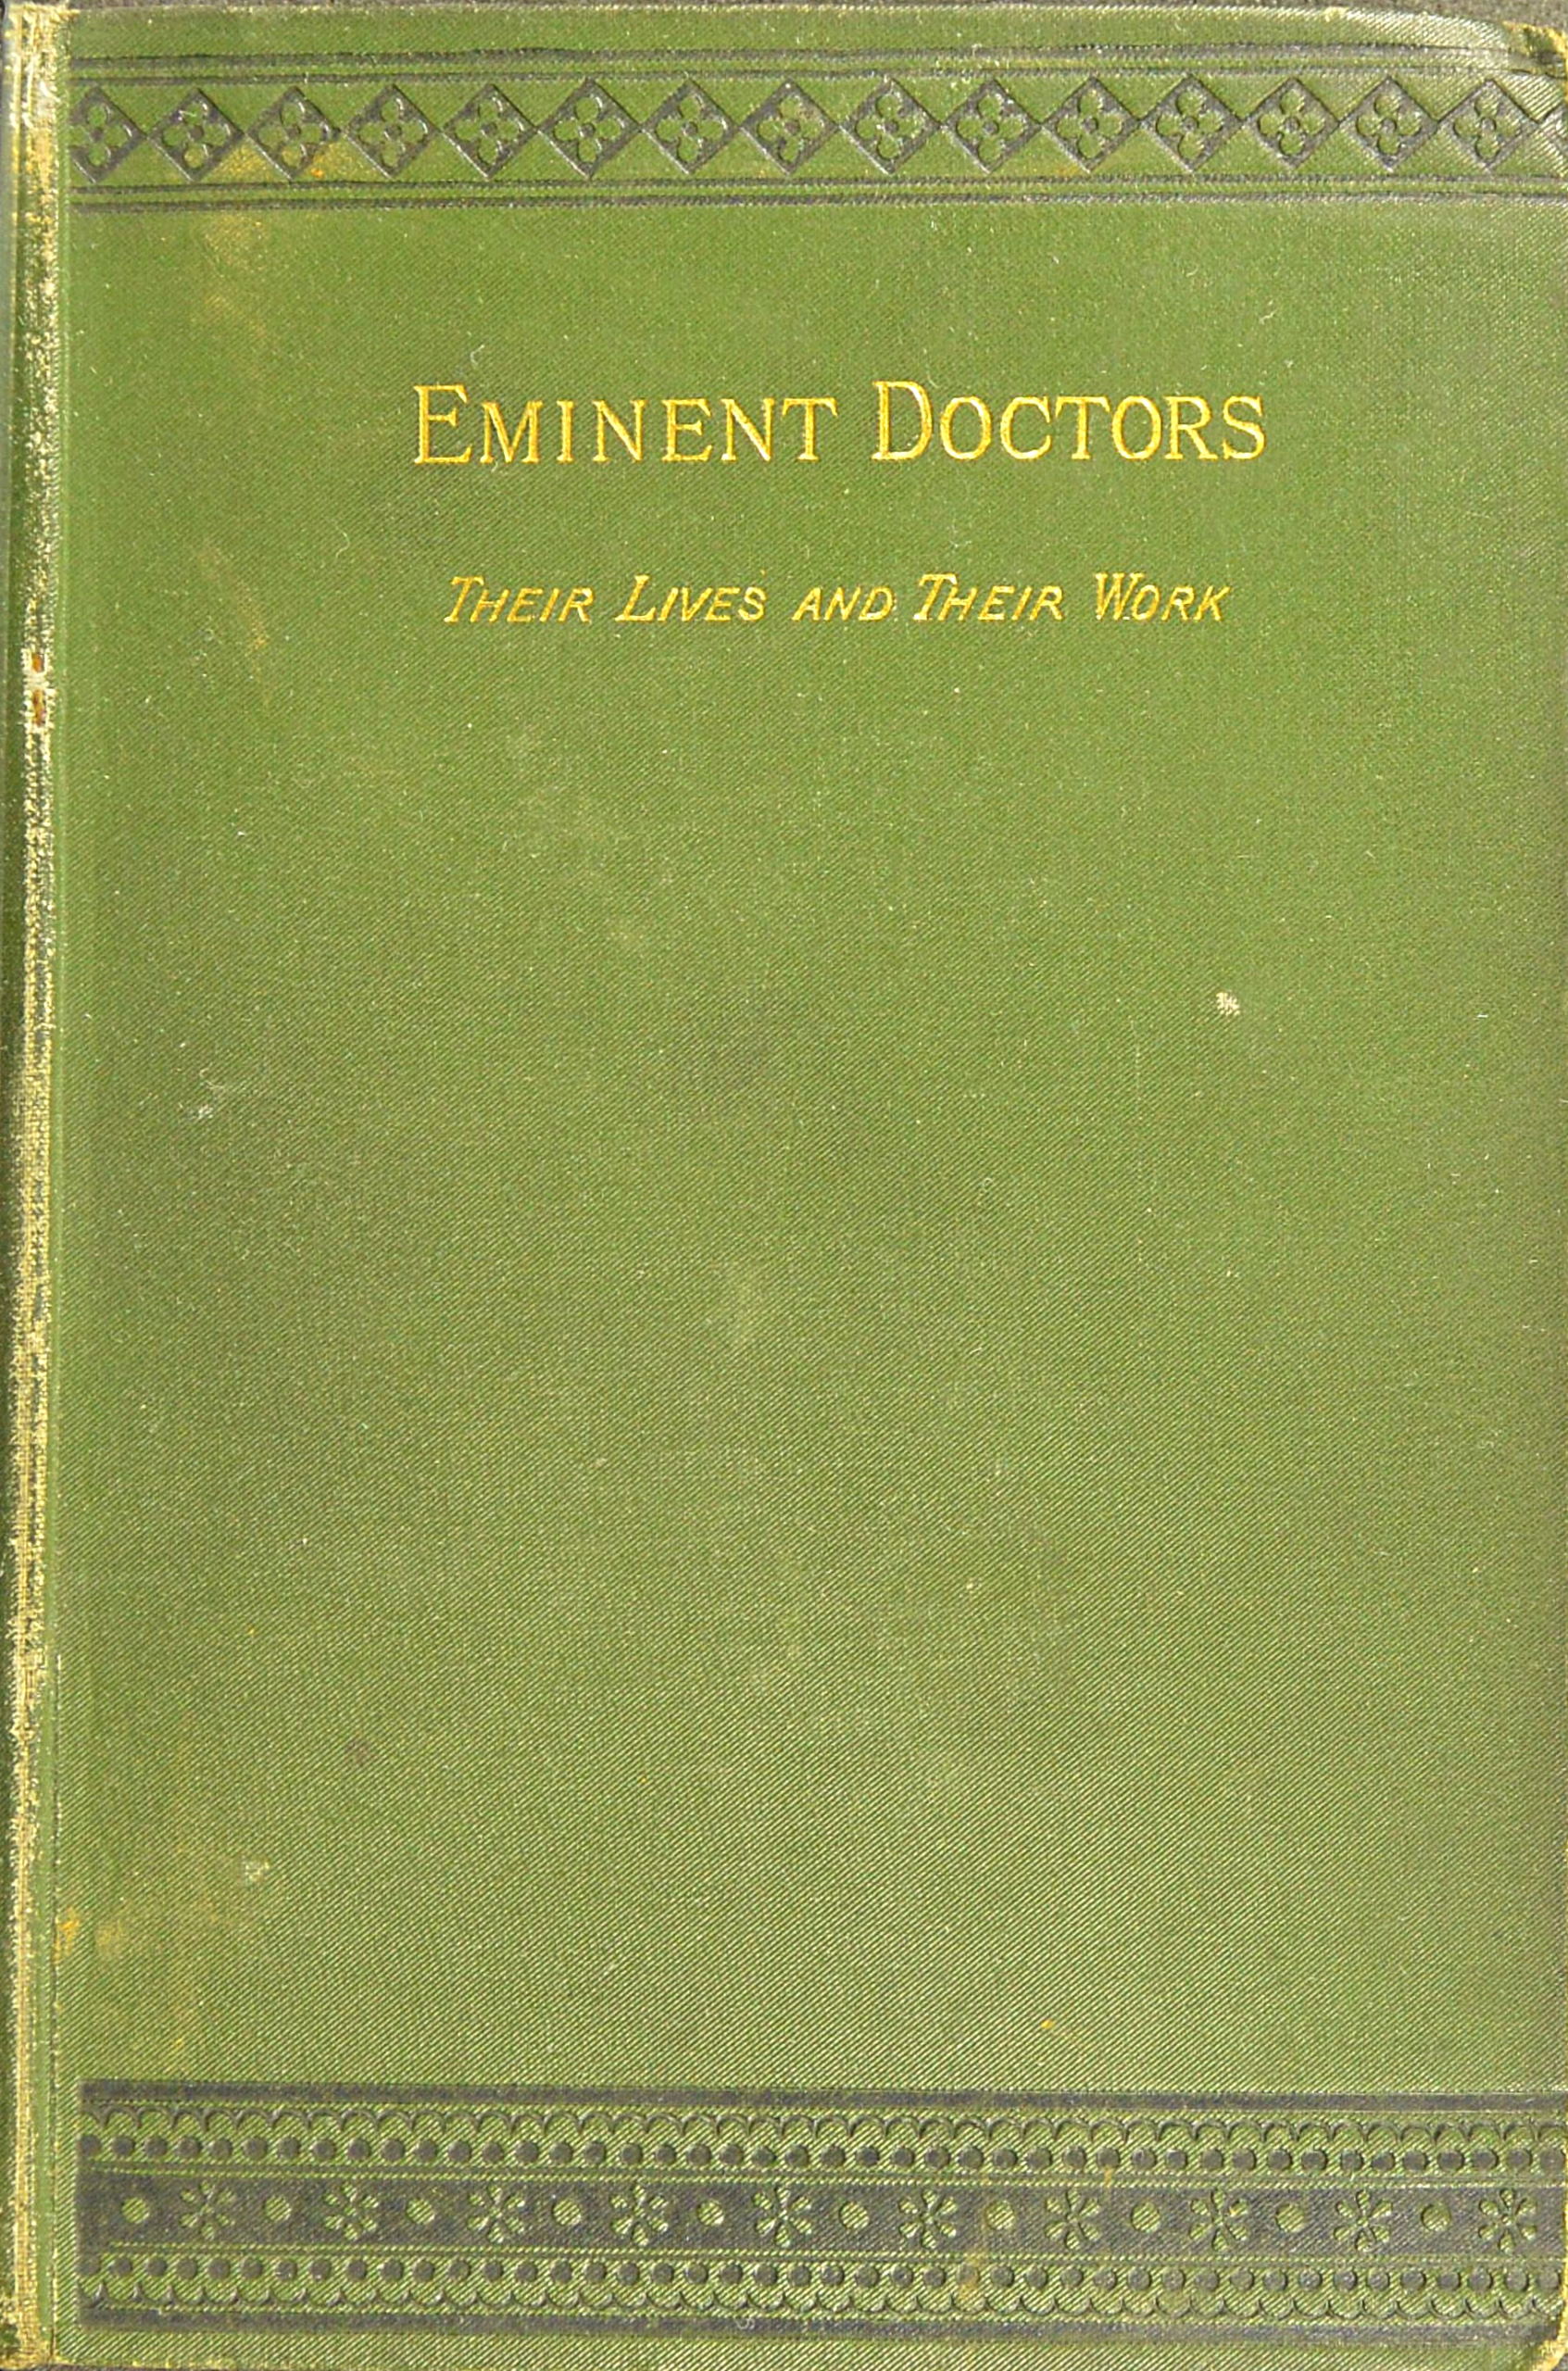 Eminent Doctors Their Lives and their Work; Vol. 2 of 2, by G pic